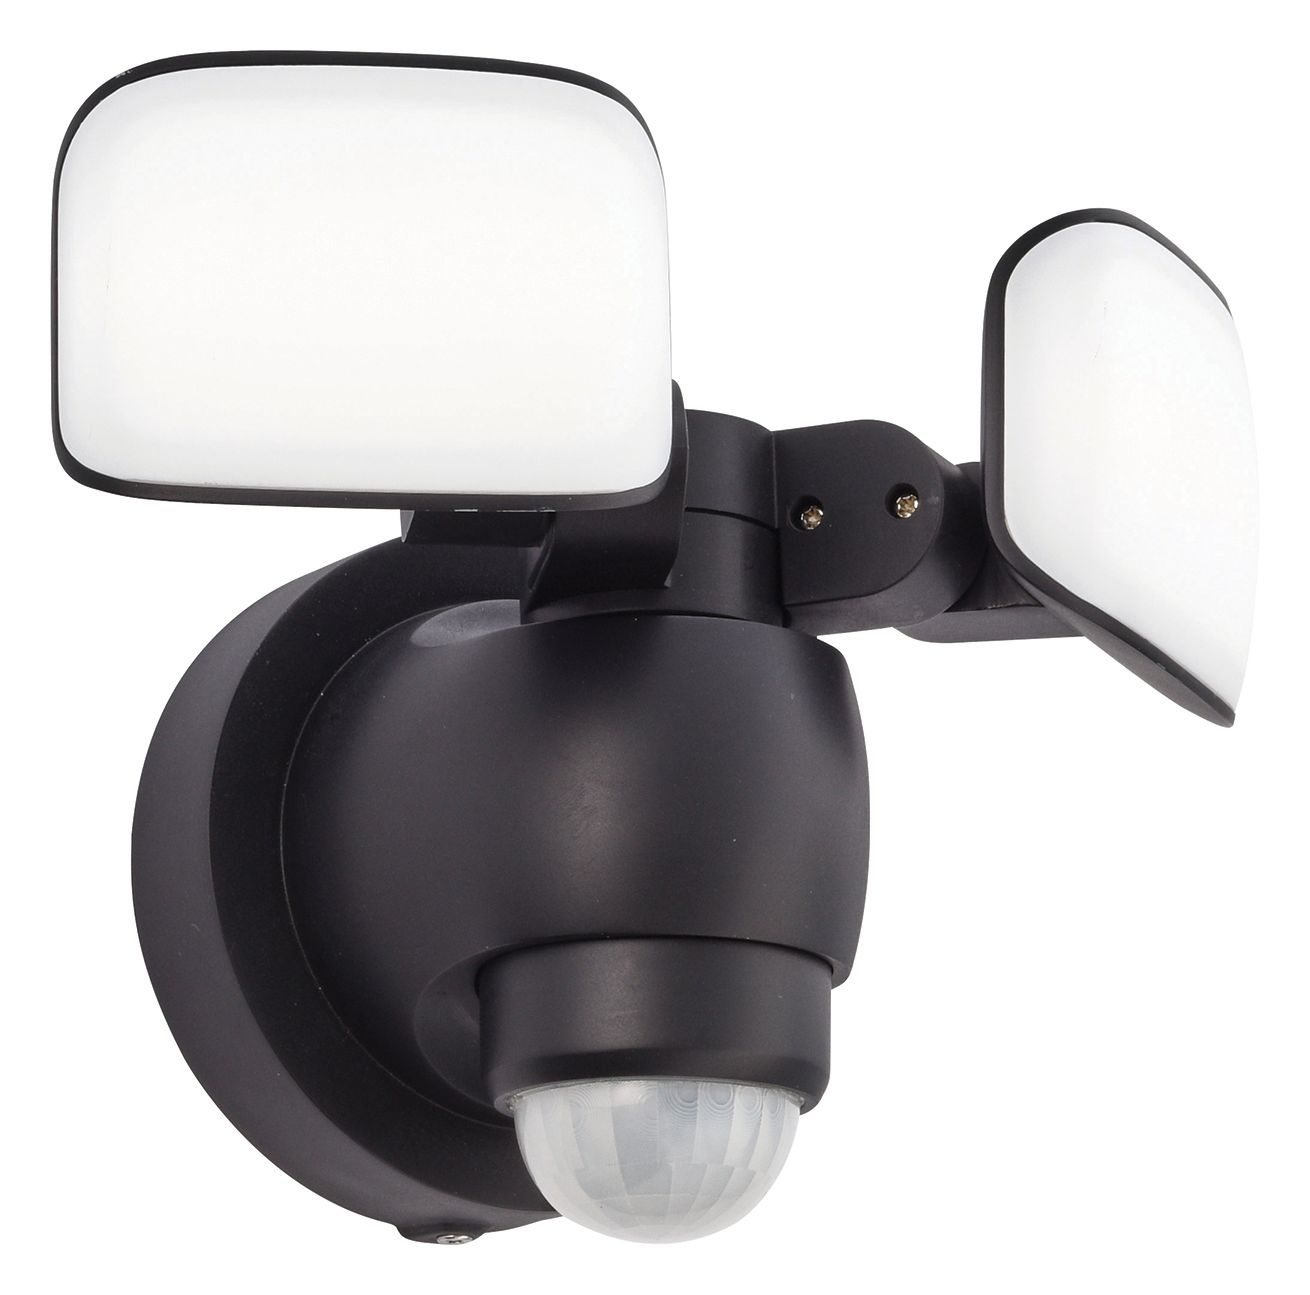 Image of Saxby Omega Mains Black Abs Plastic & Frosted Polycarbonate Security Light